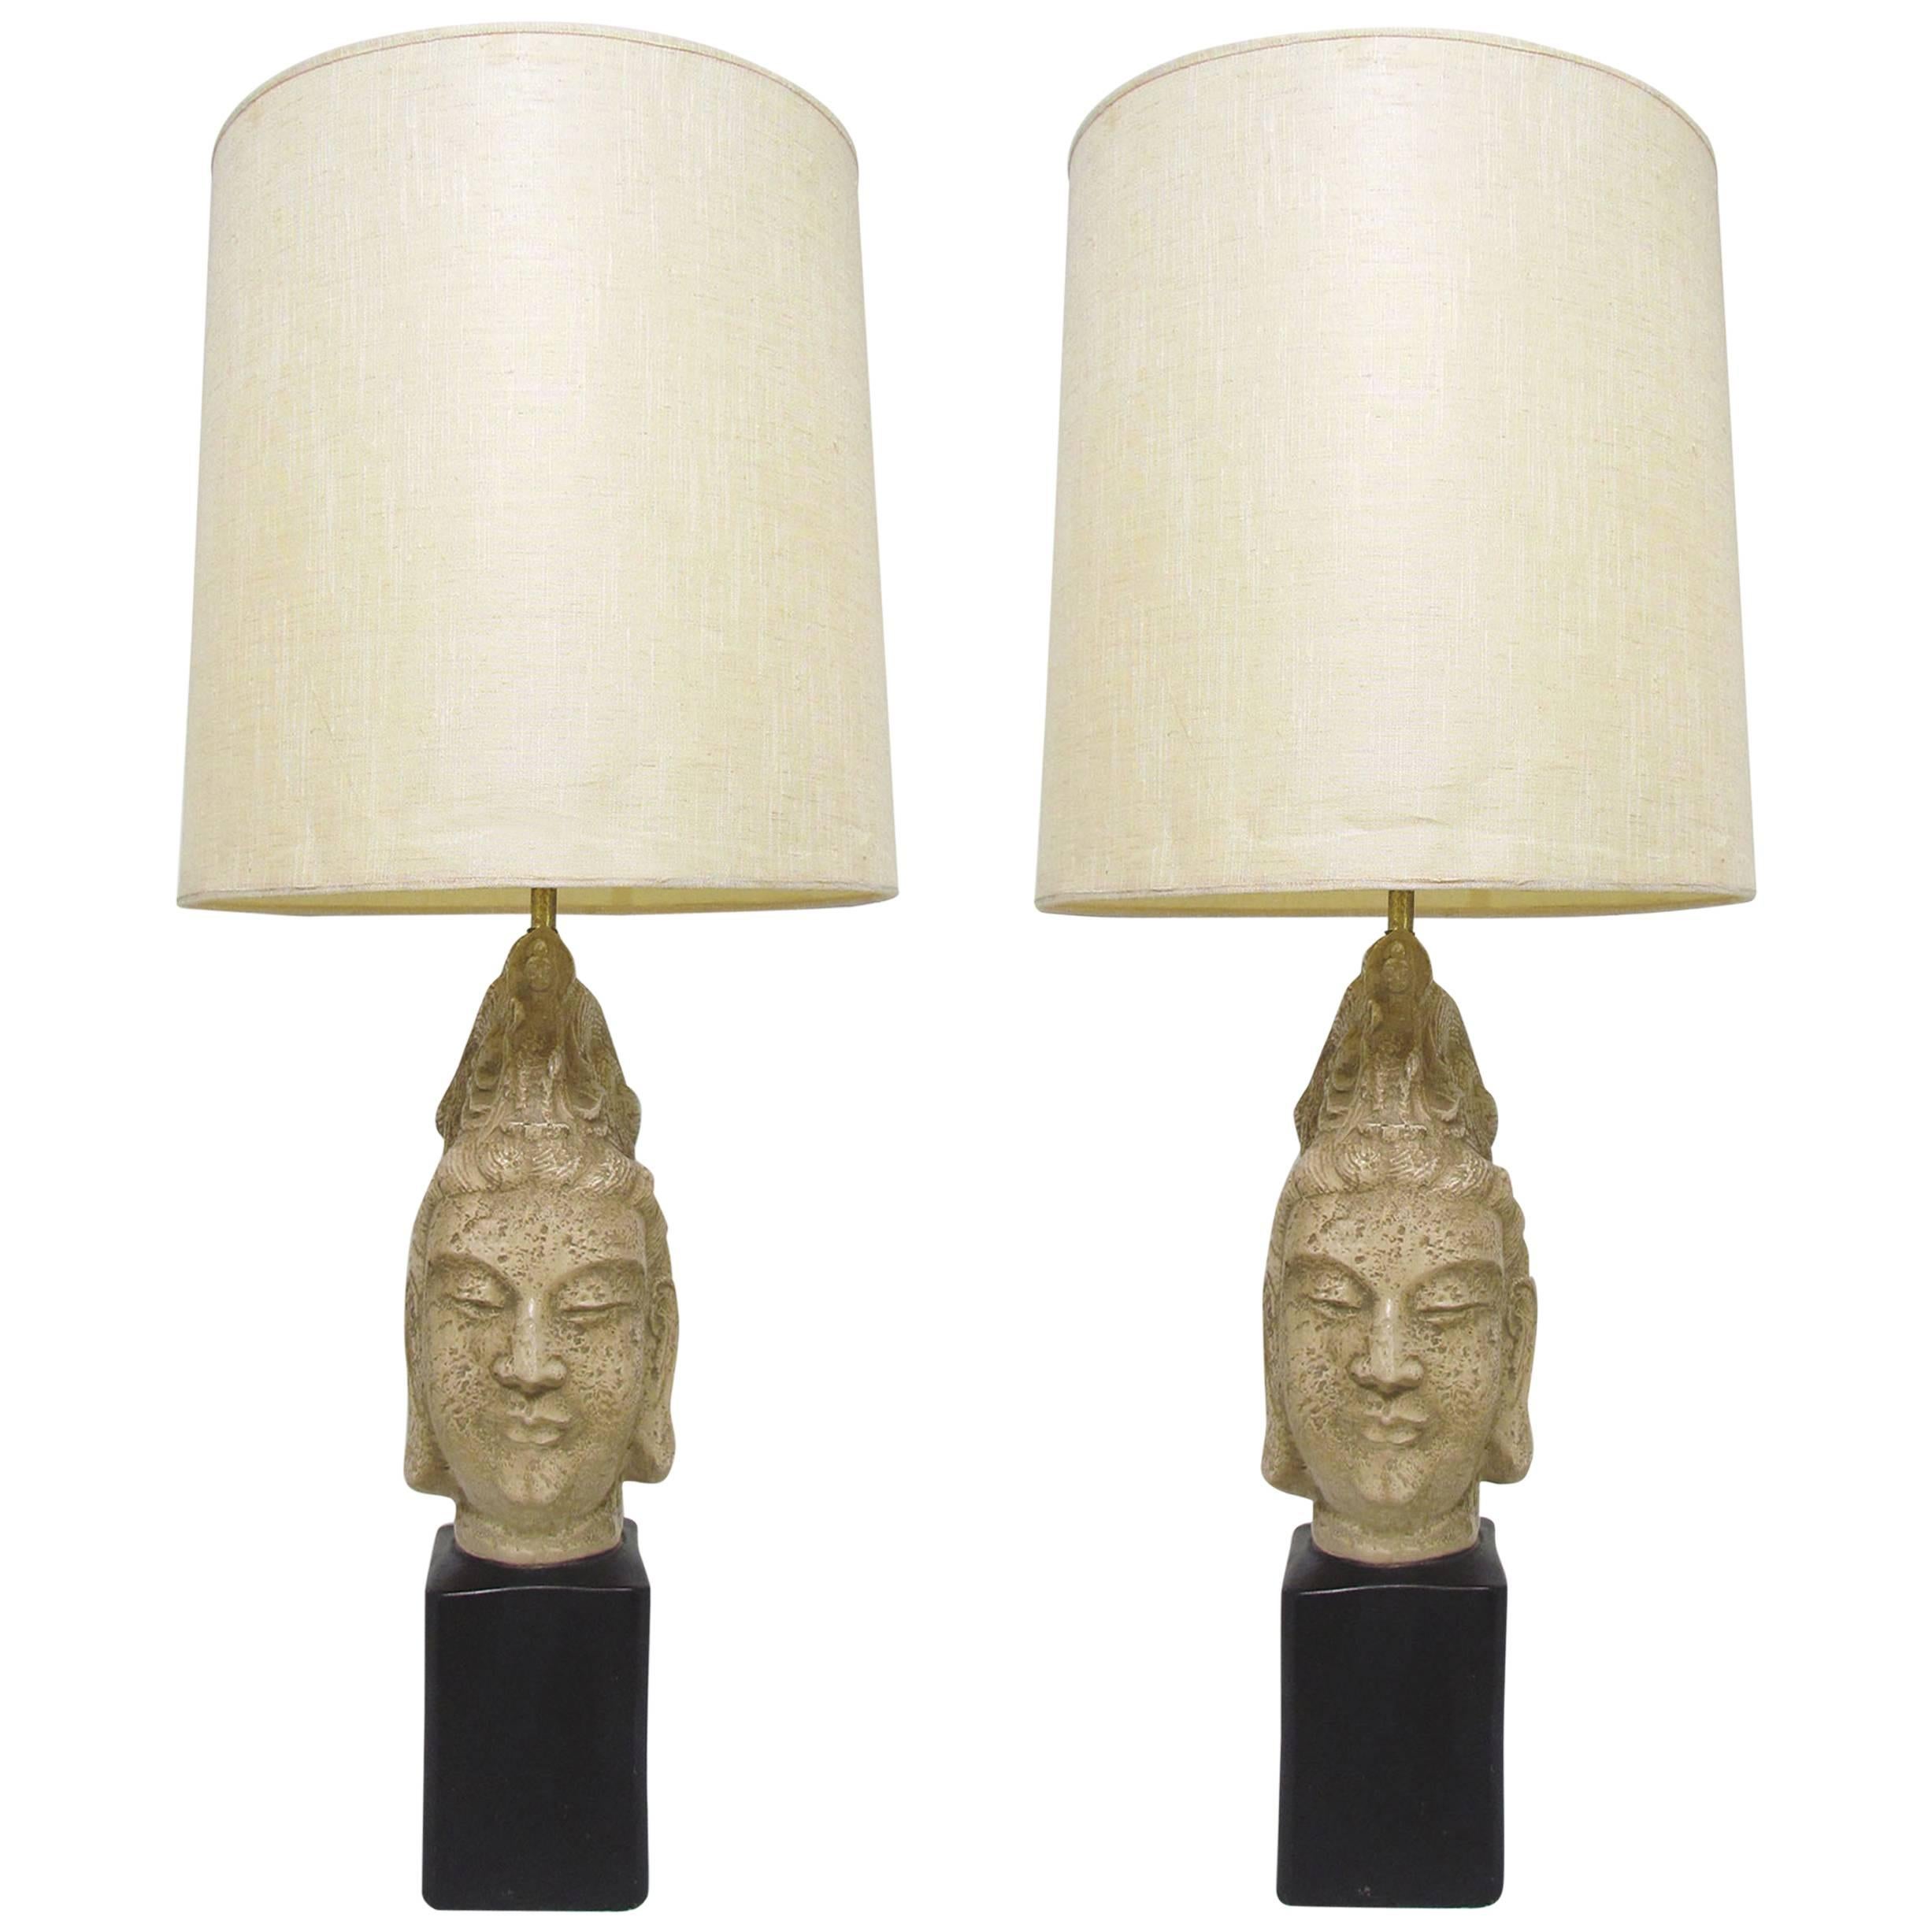 Pair of Buddha Table Lamps in the Manner of James Mont For Sale